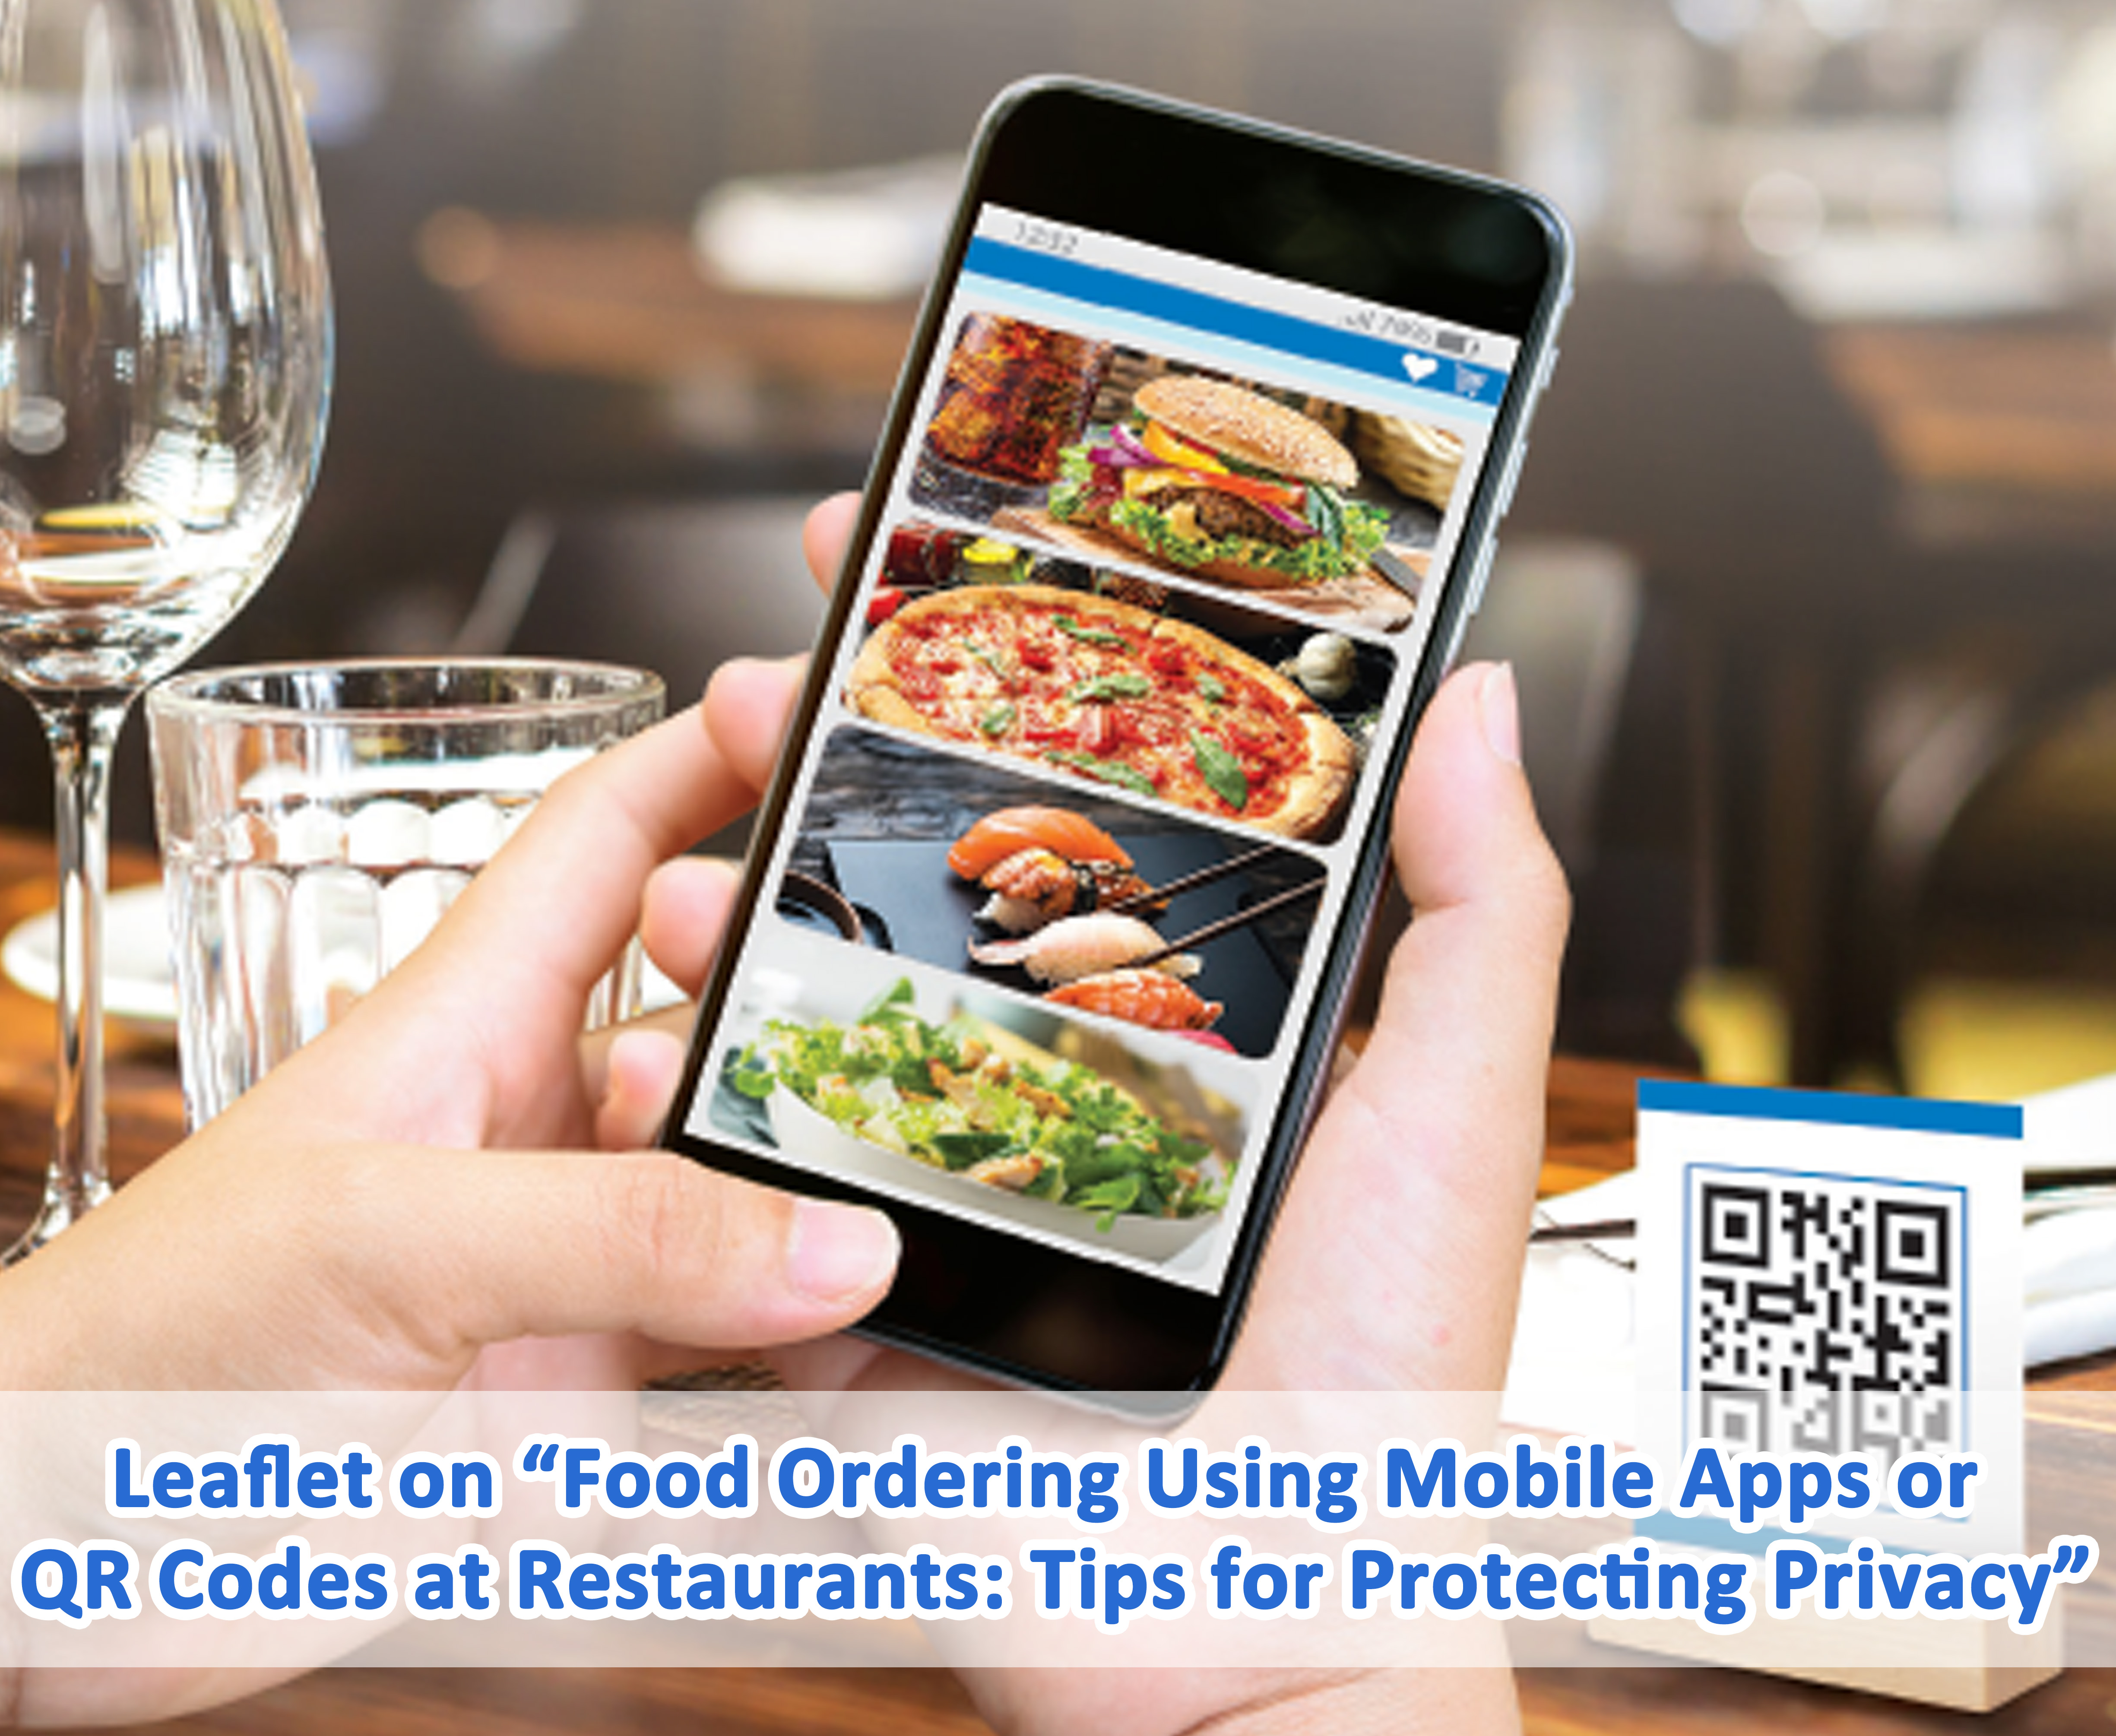 Food Ordering Using Mobile Apps or QR Codes at Restaurants: Tips for Protecting Privacy